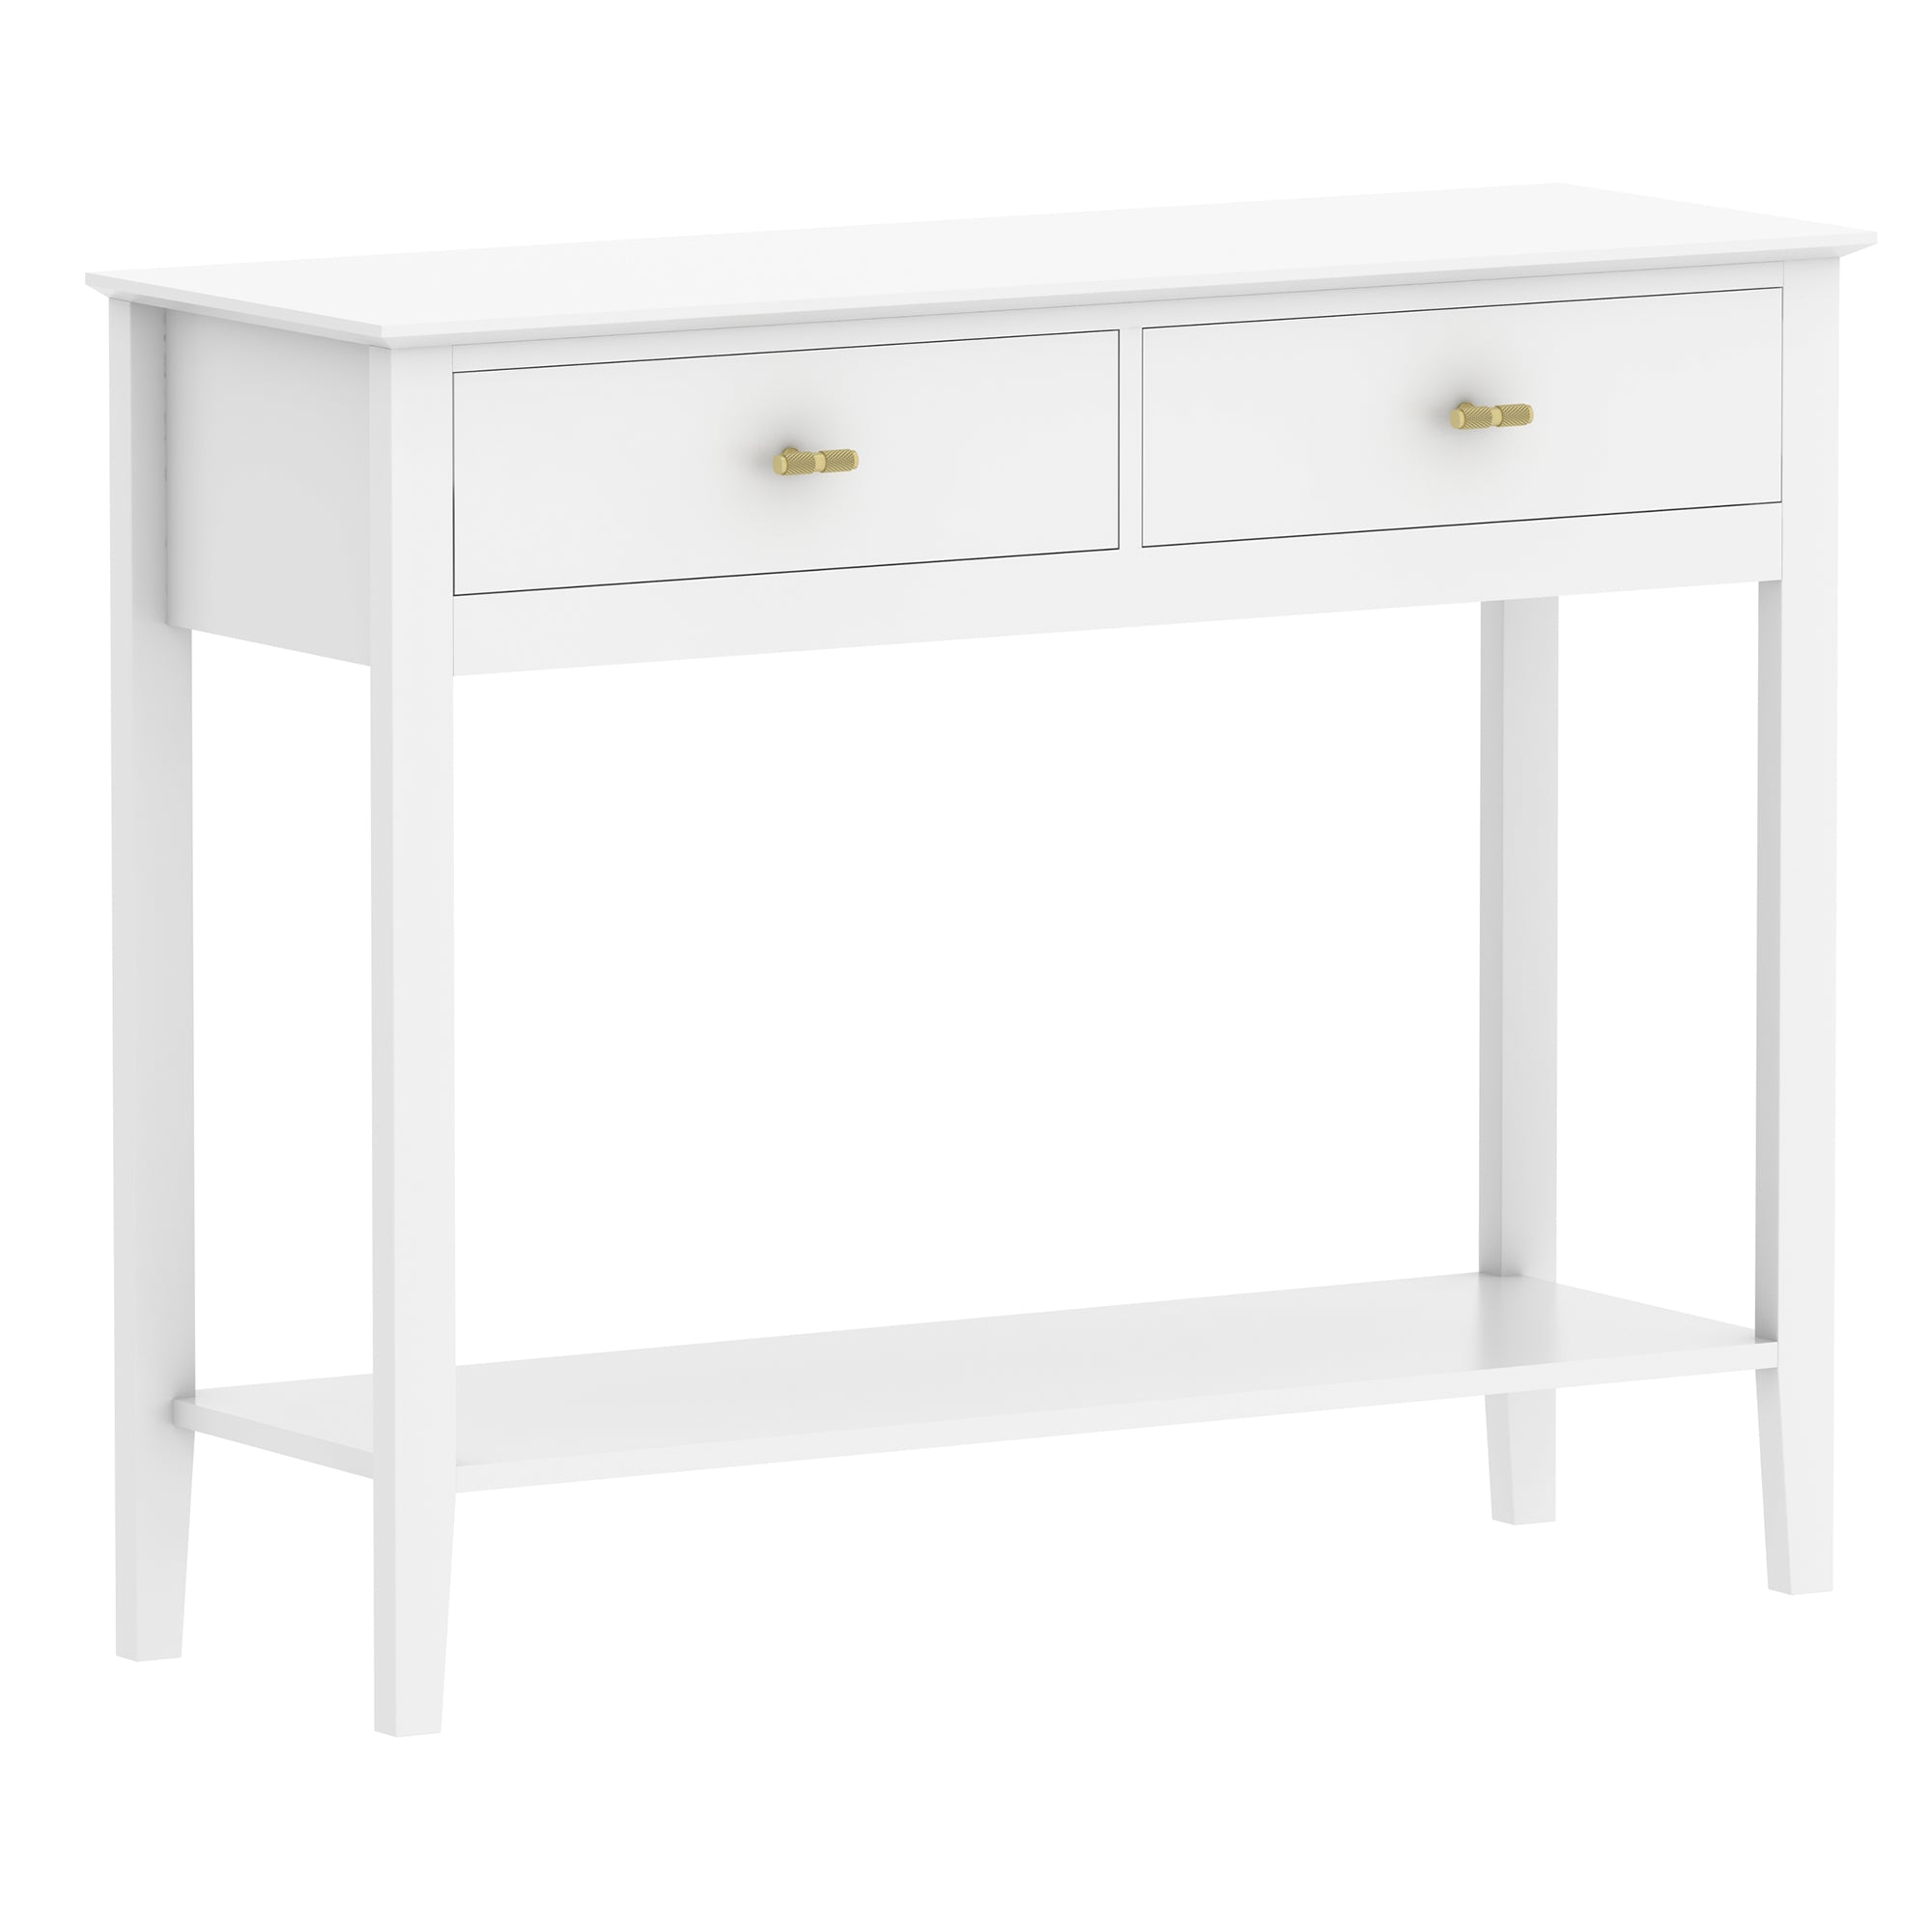 Harper White Console Table: Stylish Storage for Entryway or Living Room